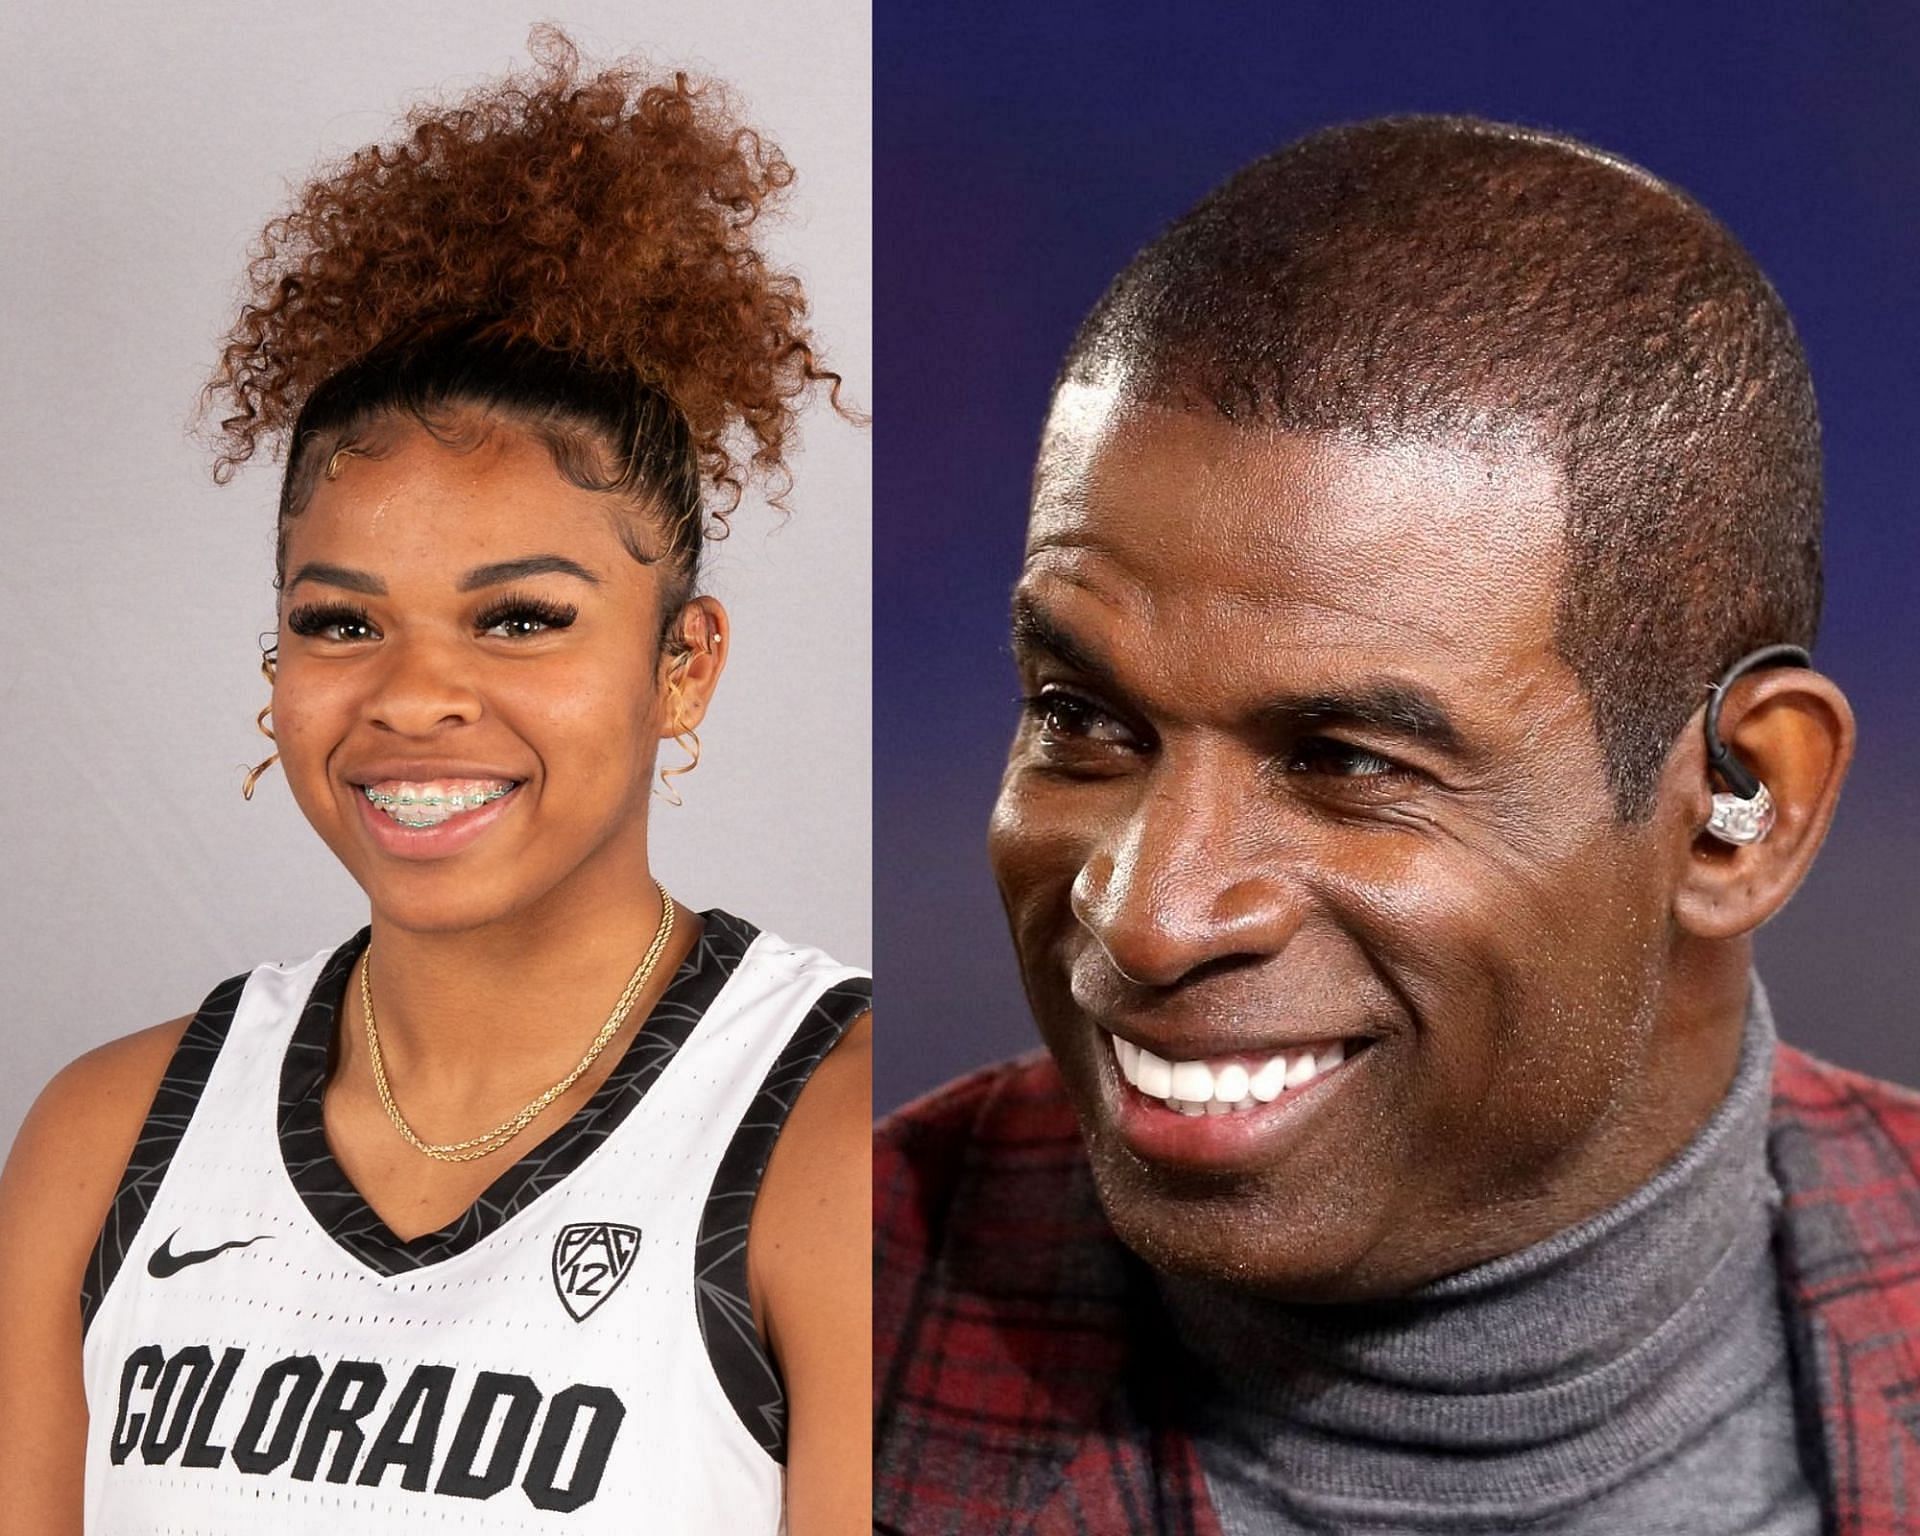 Who Is Deion Sanders Daughter Shelomi Sanders More About The Basketball Star From Colorado